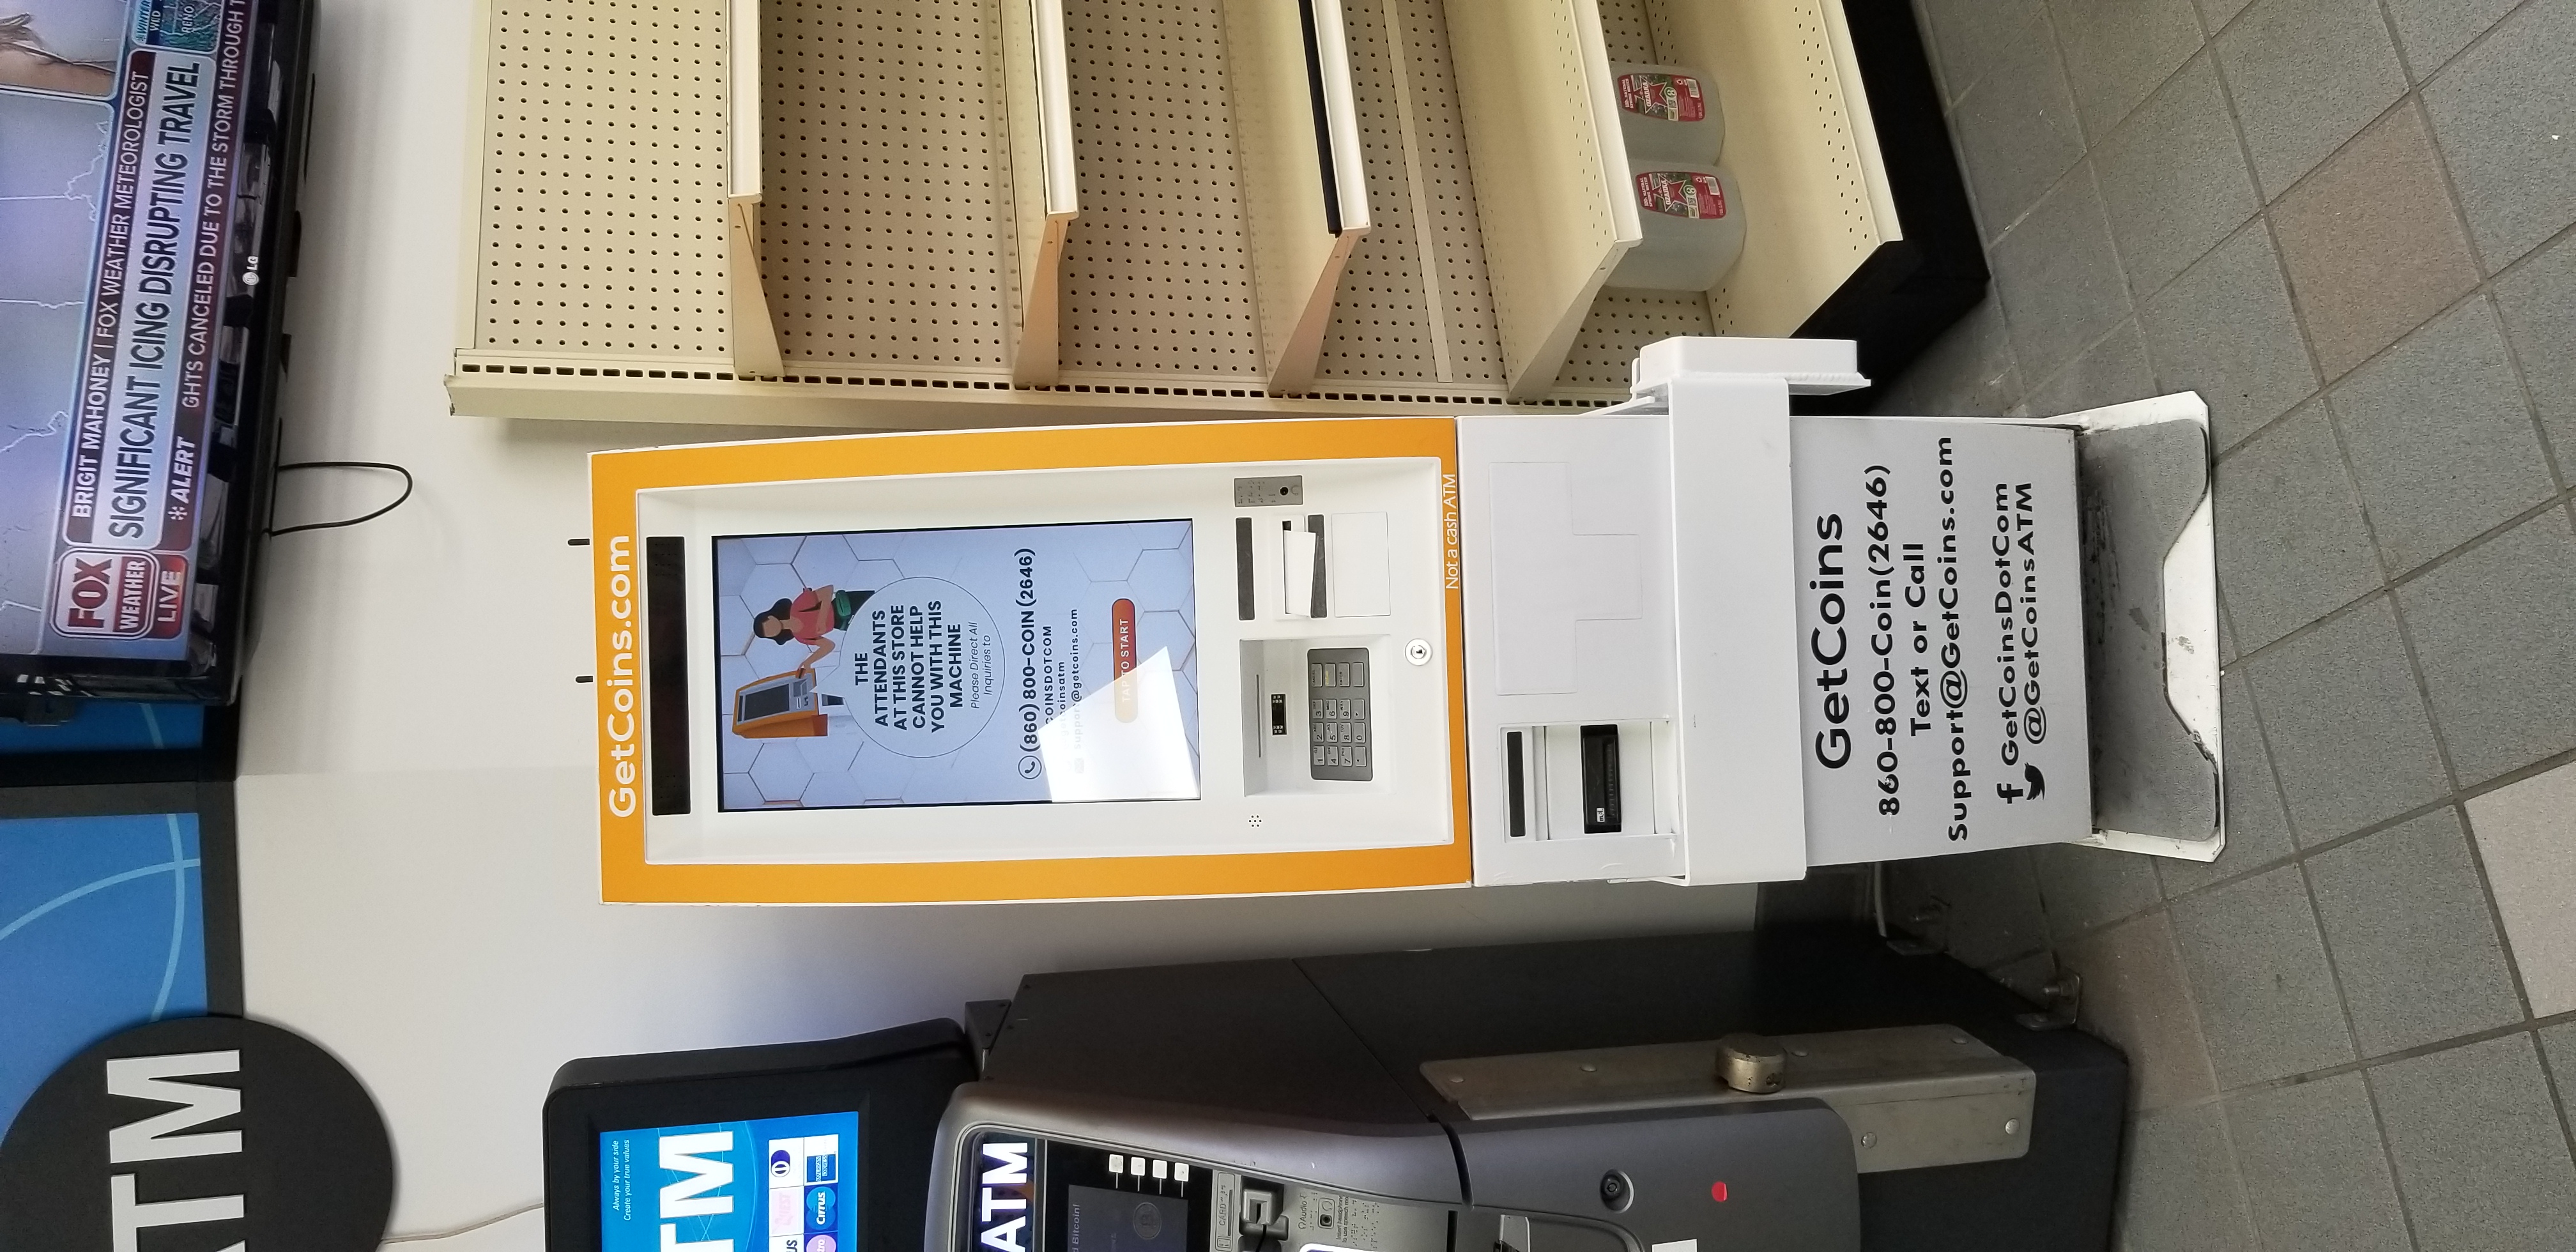 Getcoins - Bitcoin ATM - Inside of 1 Stop #8 in Houston, Texas